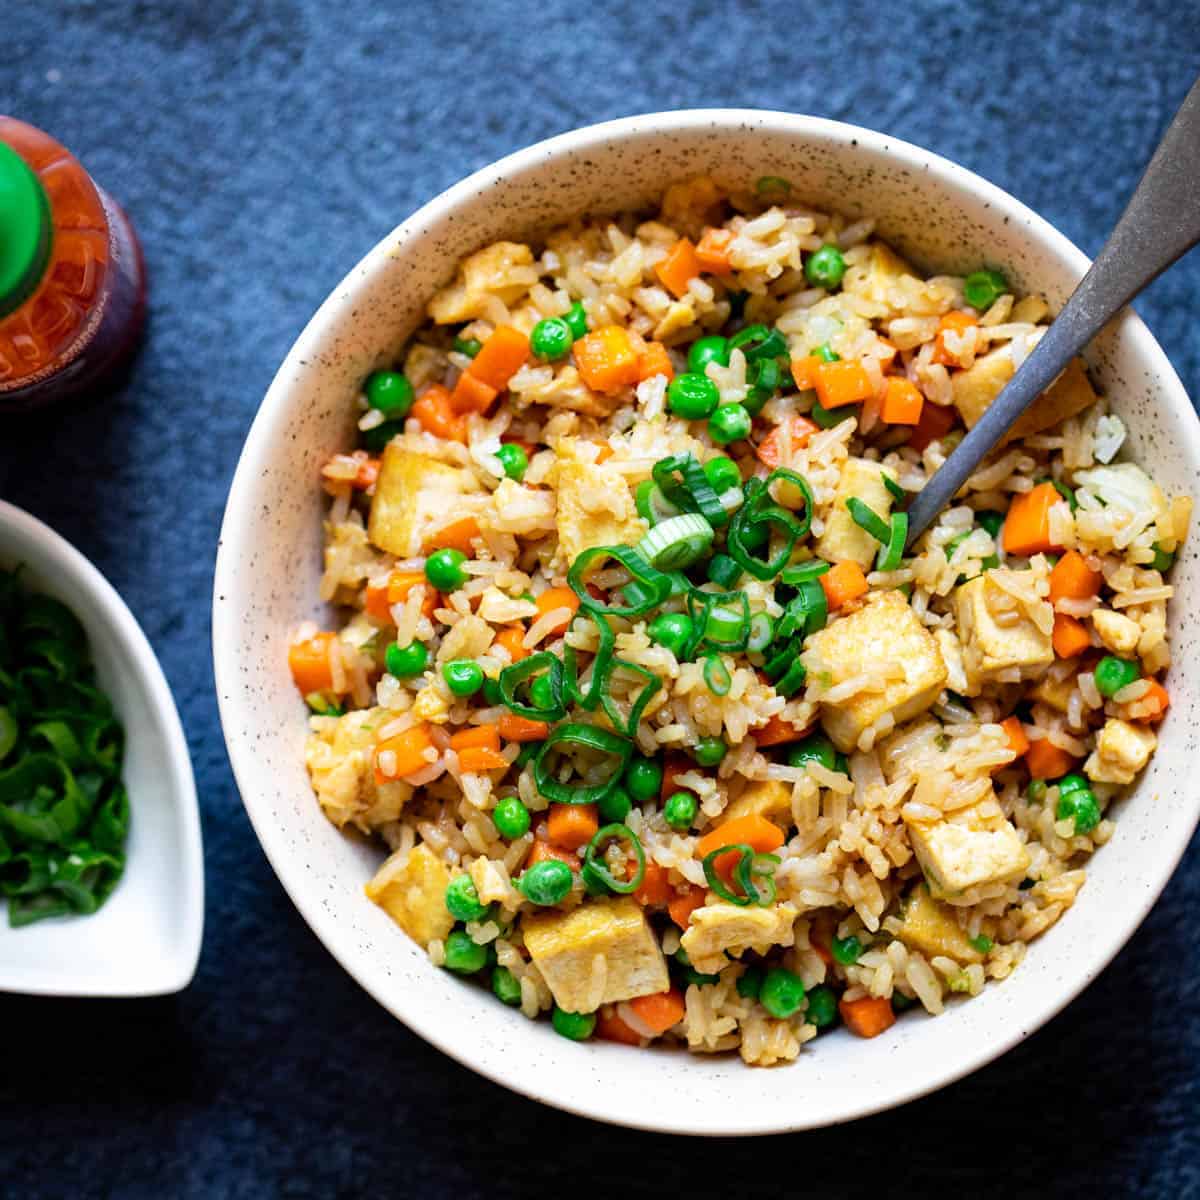 Chilli-fried tofu with egg-fried rice